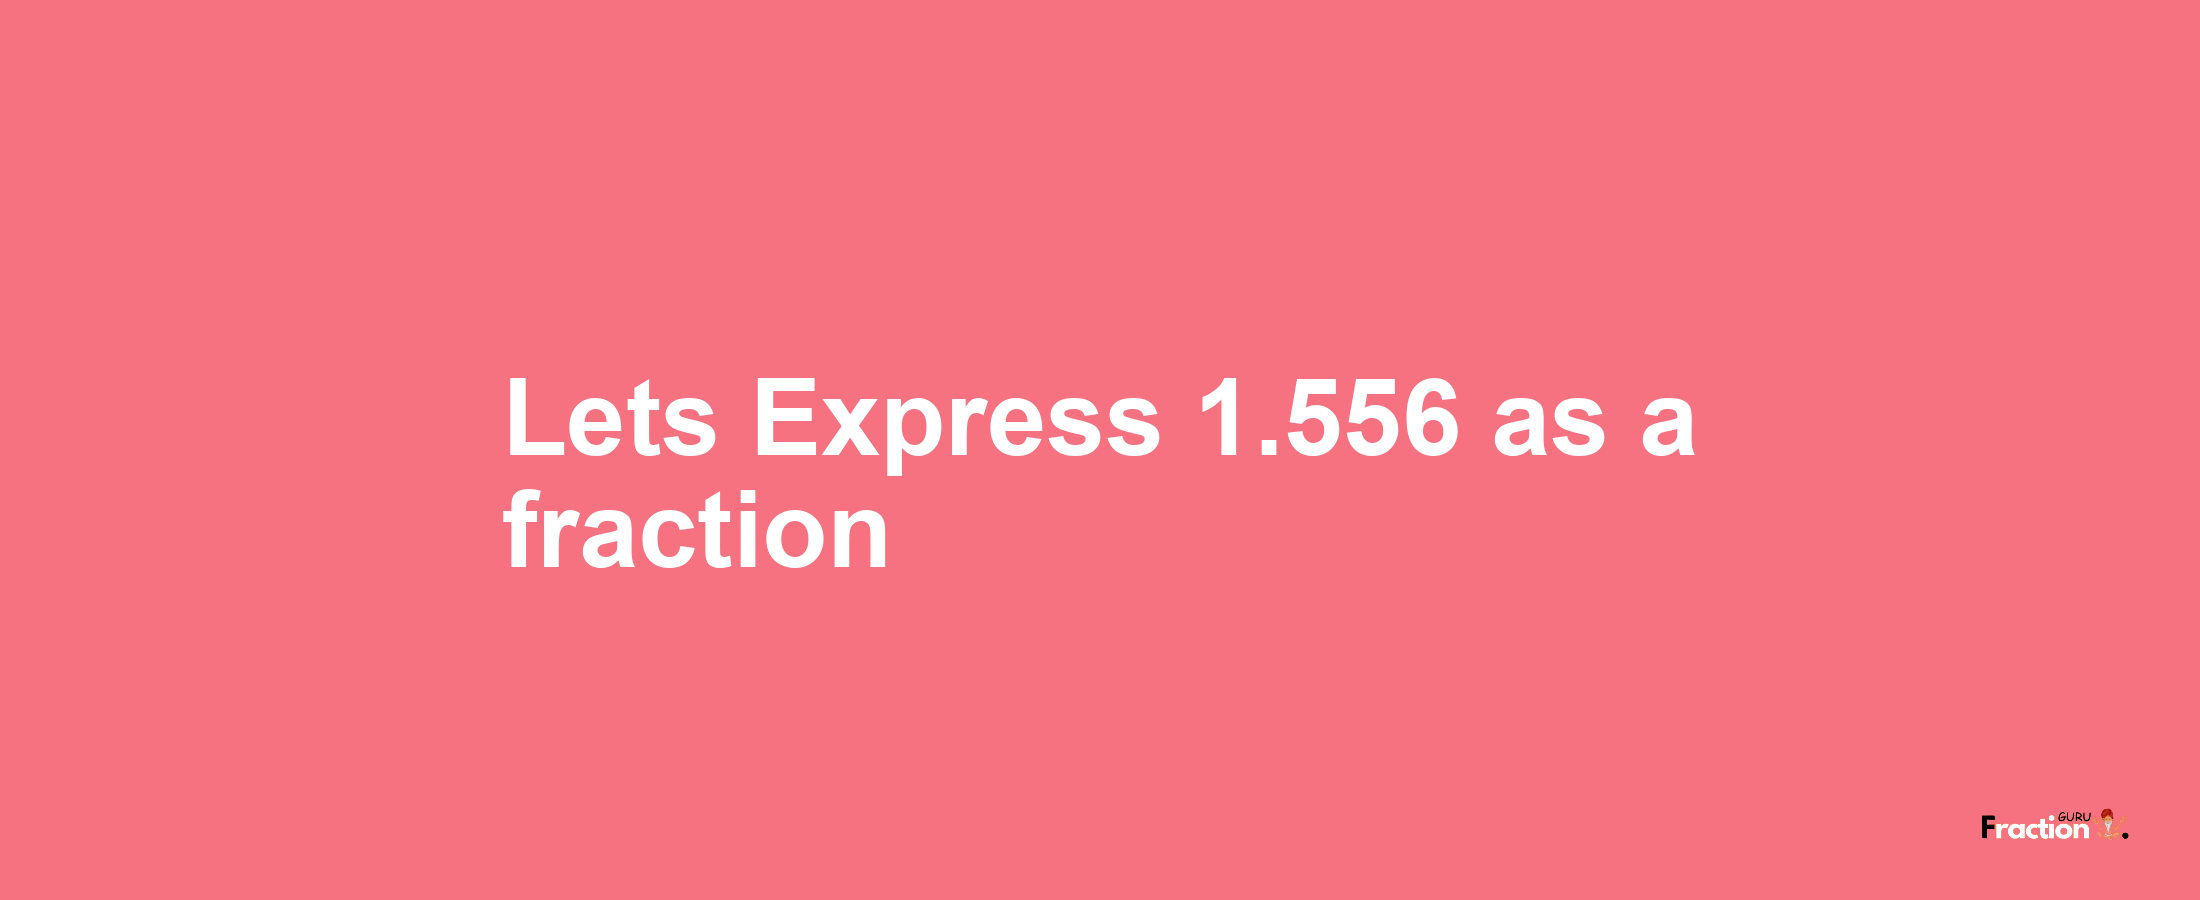 Lets Express 1.556 as afraction